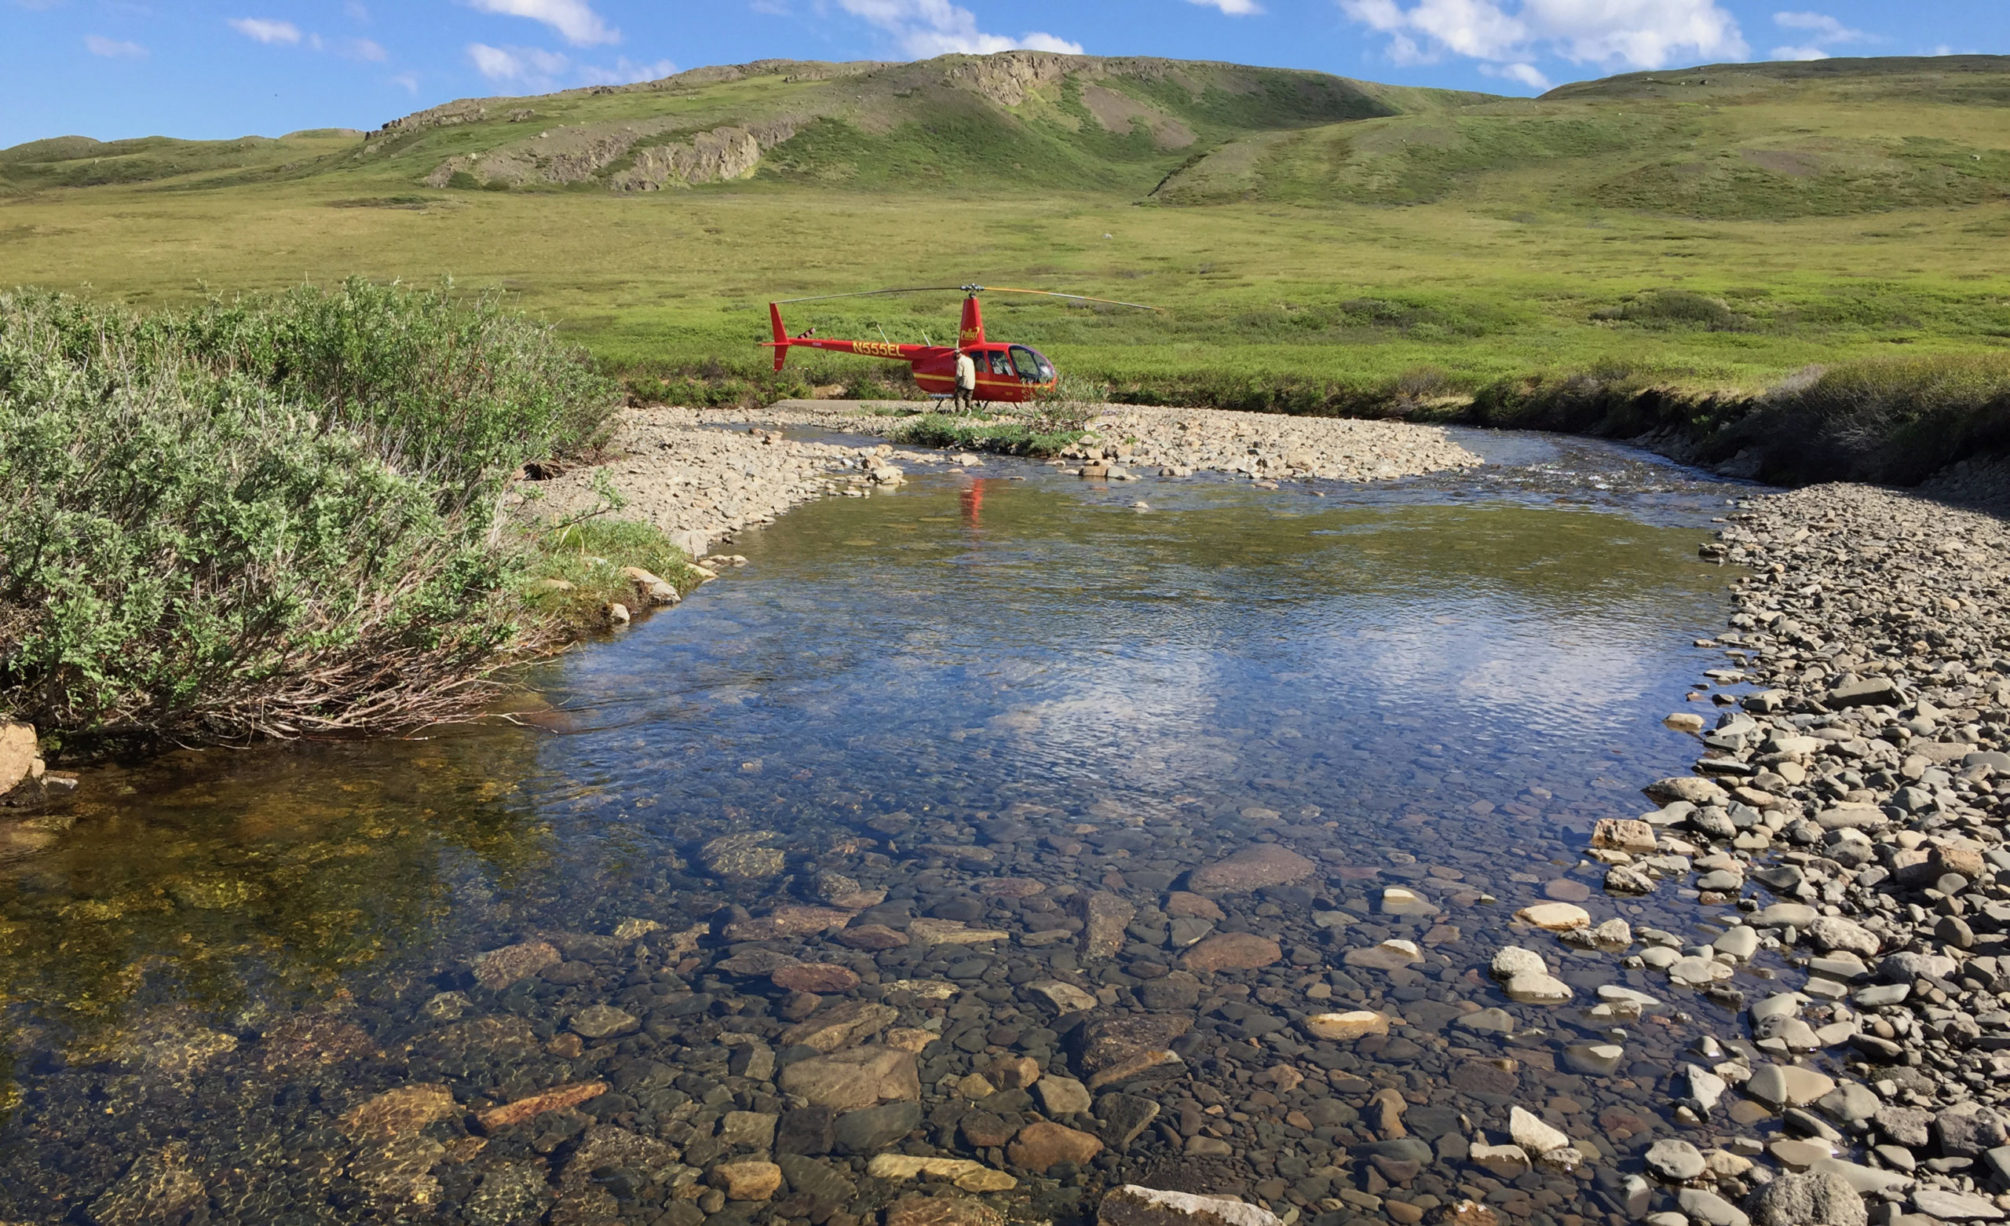 shallow gravelly streambed with helicopter and tussocky hills in the background